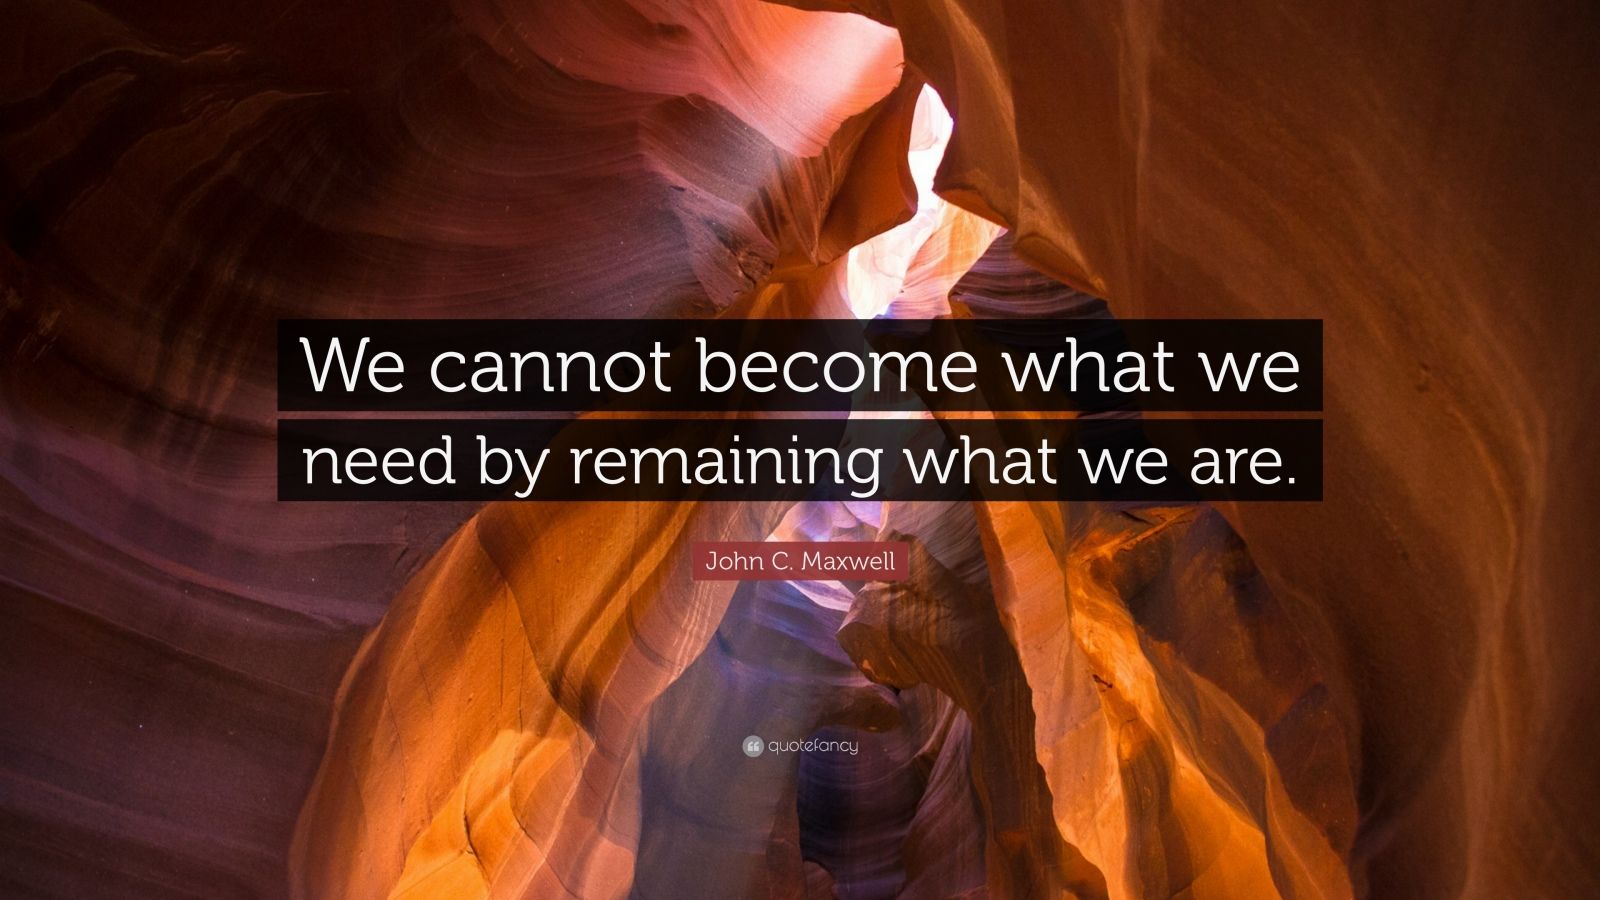 John C. Maxwell Quote “We cannot what we need by remaining what